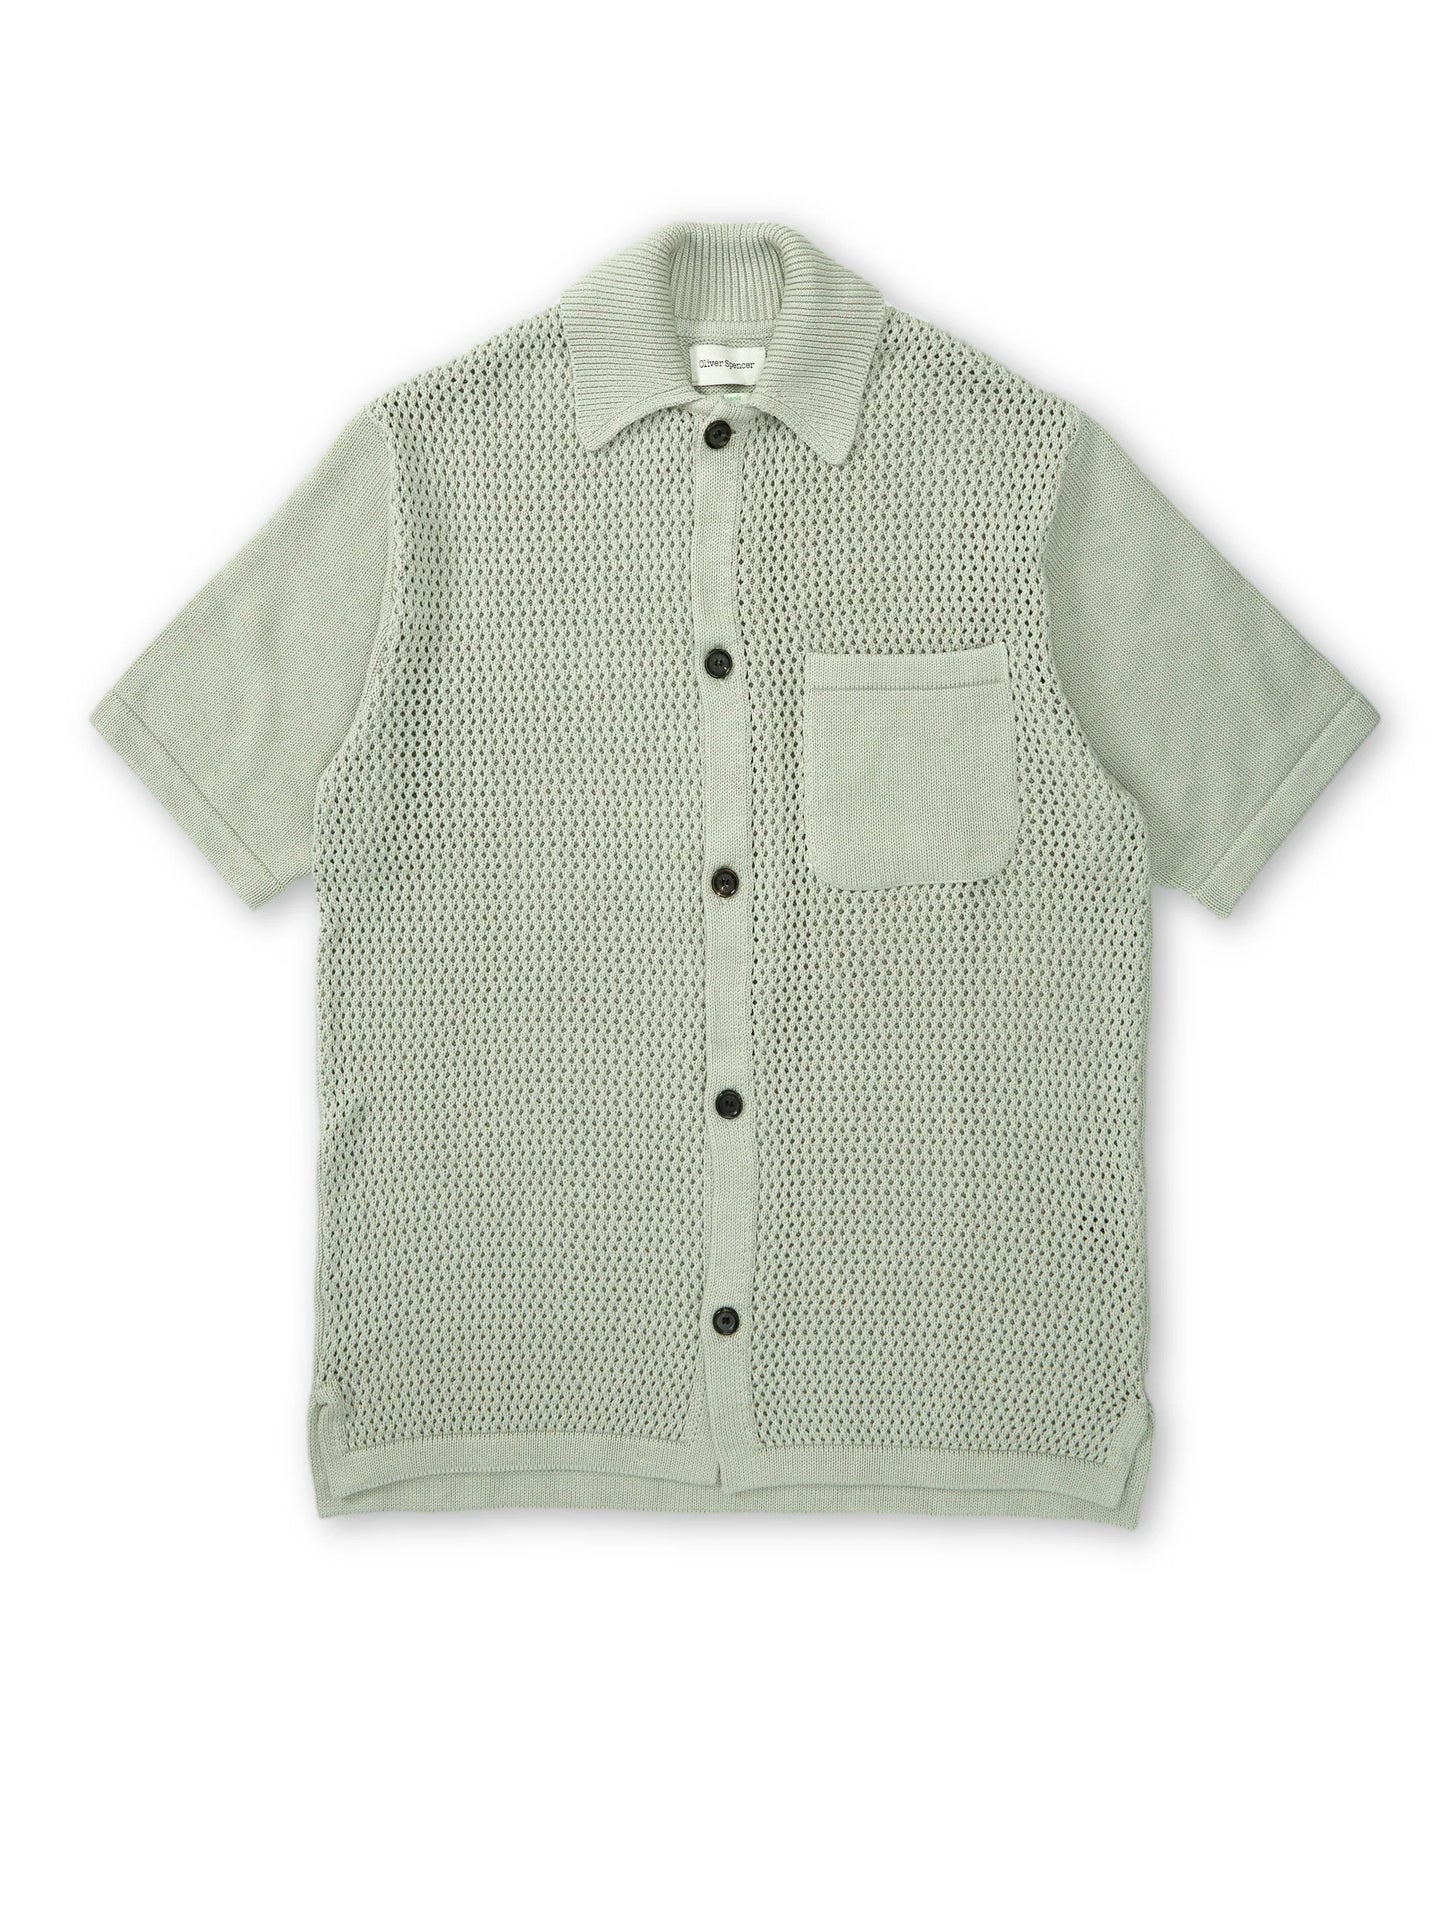 Mawes S/S Knitted Shirt - Tamar Pale Green